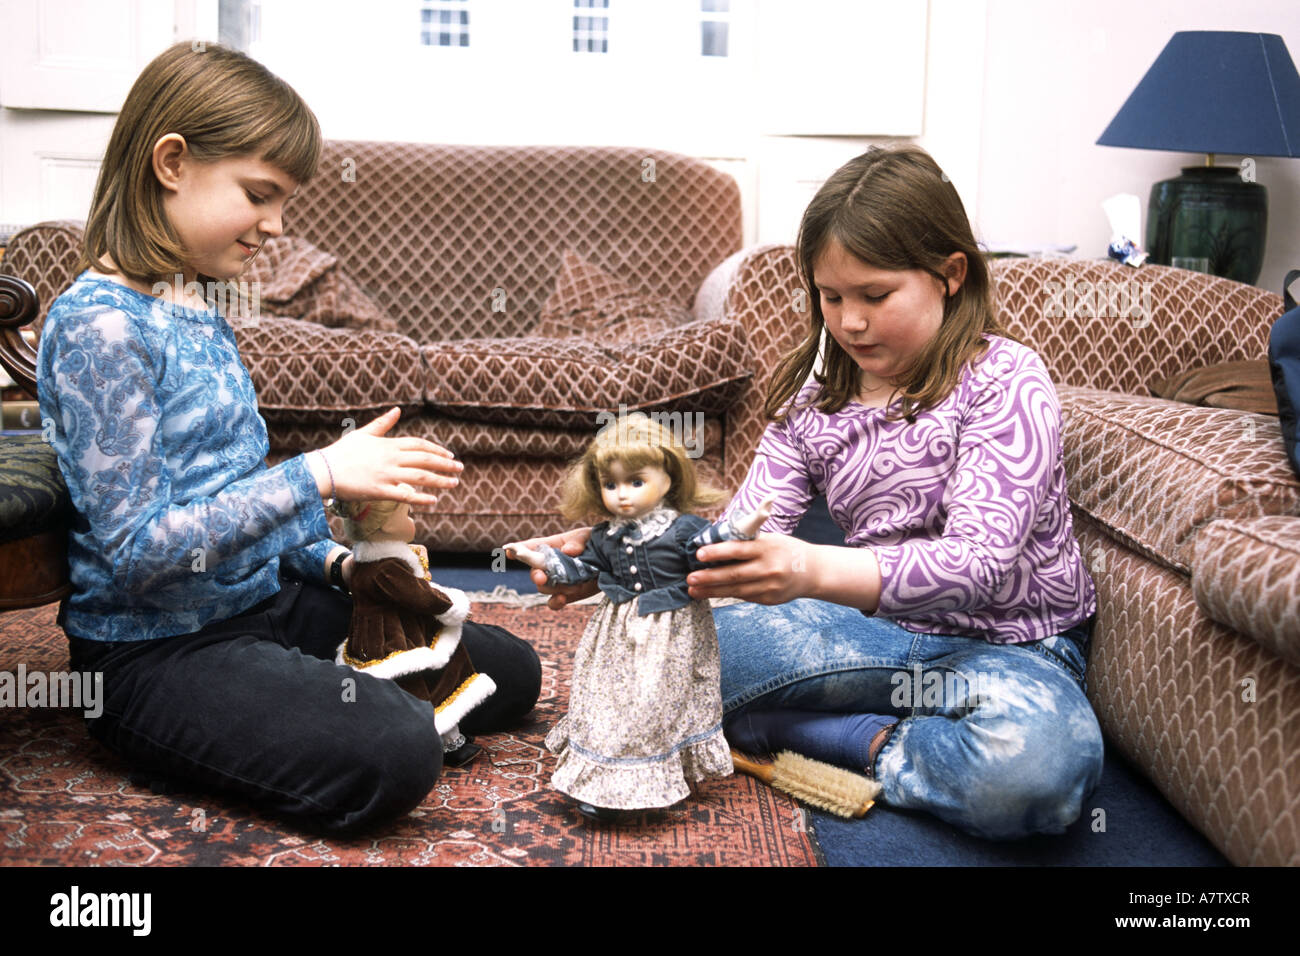 young girls playing with dolls Stock Photo